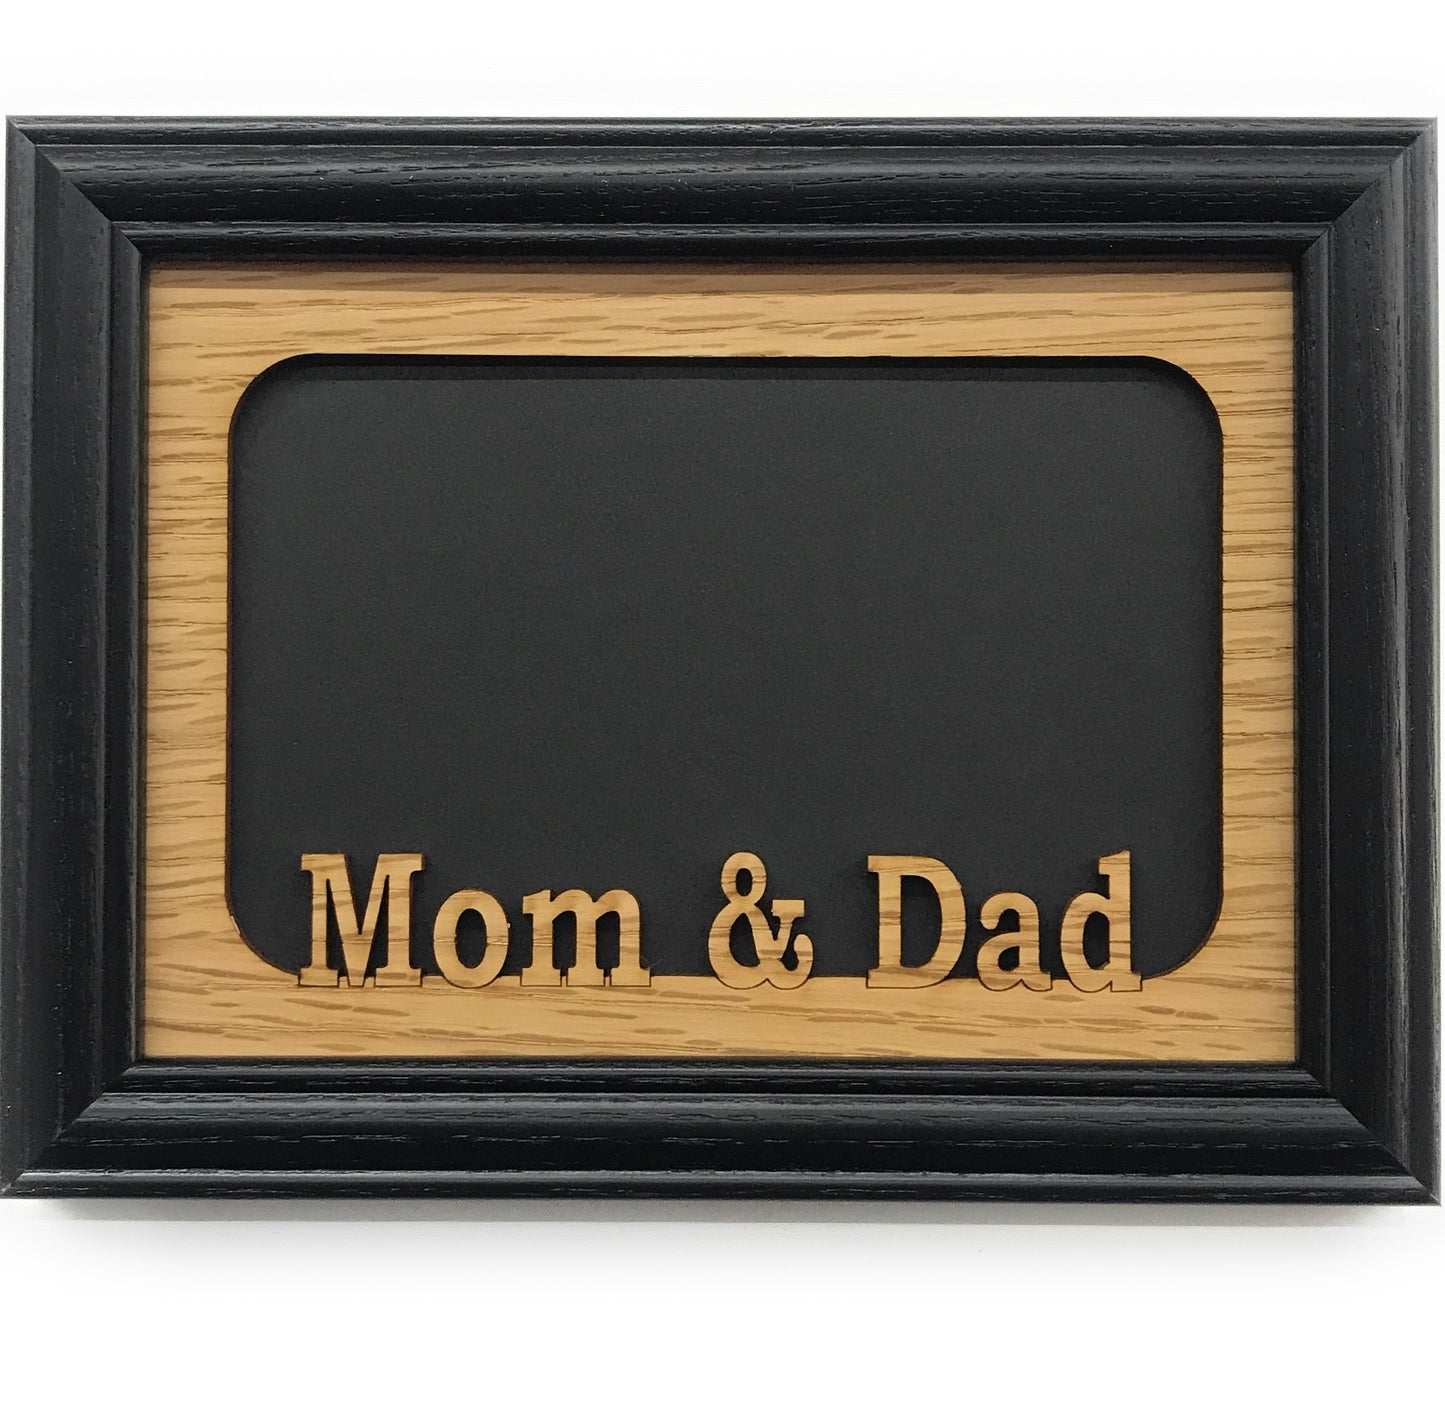 Mom And Dad Picture Frame - 5x7 Frame Hold 4x6 Photo